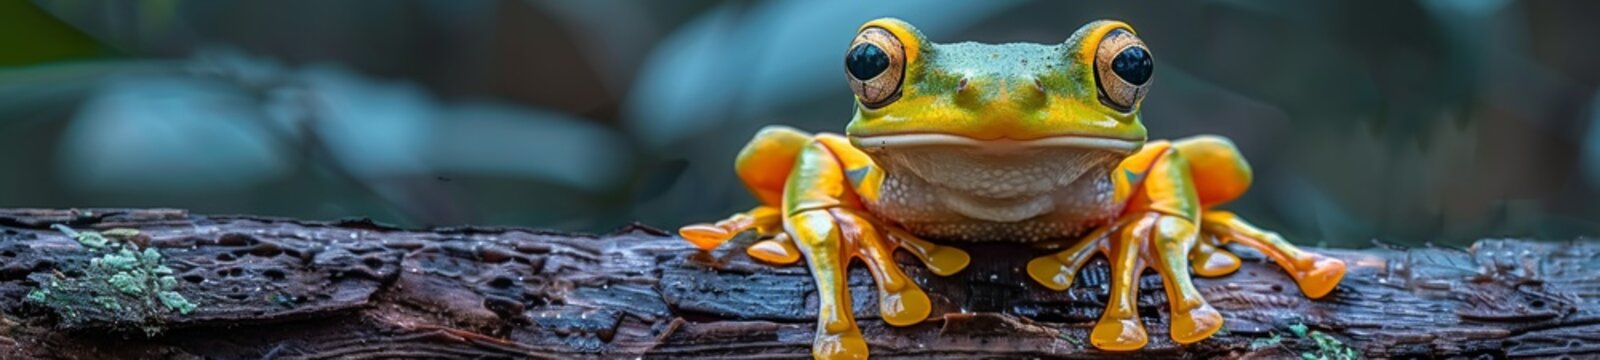 In the rainforest, the gliding tree frog uses its webbed feet to leap and glide between branches, escaping predators and finding food across the forest's diverse layers.